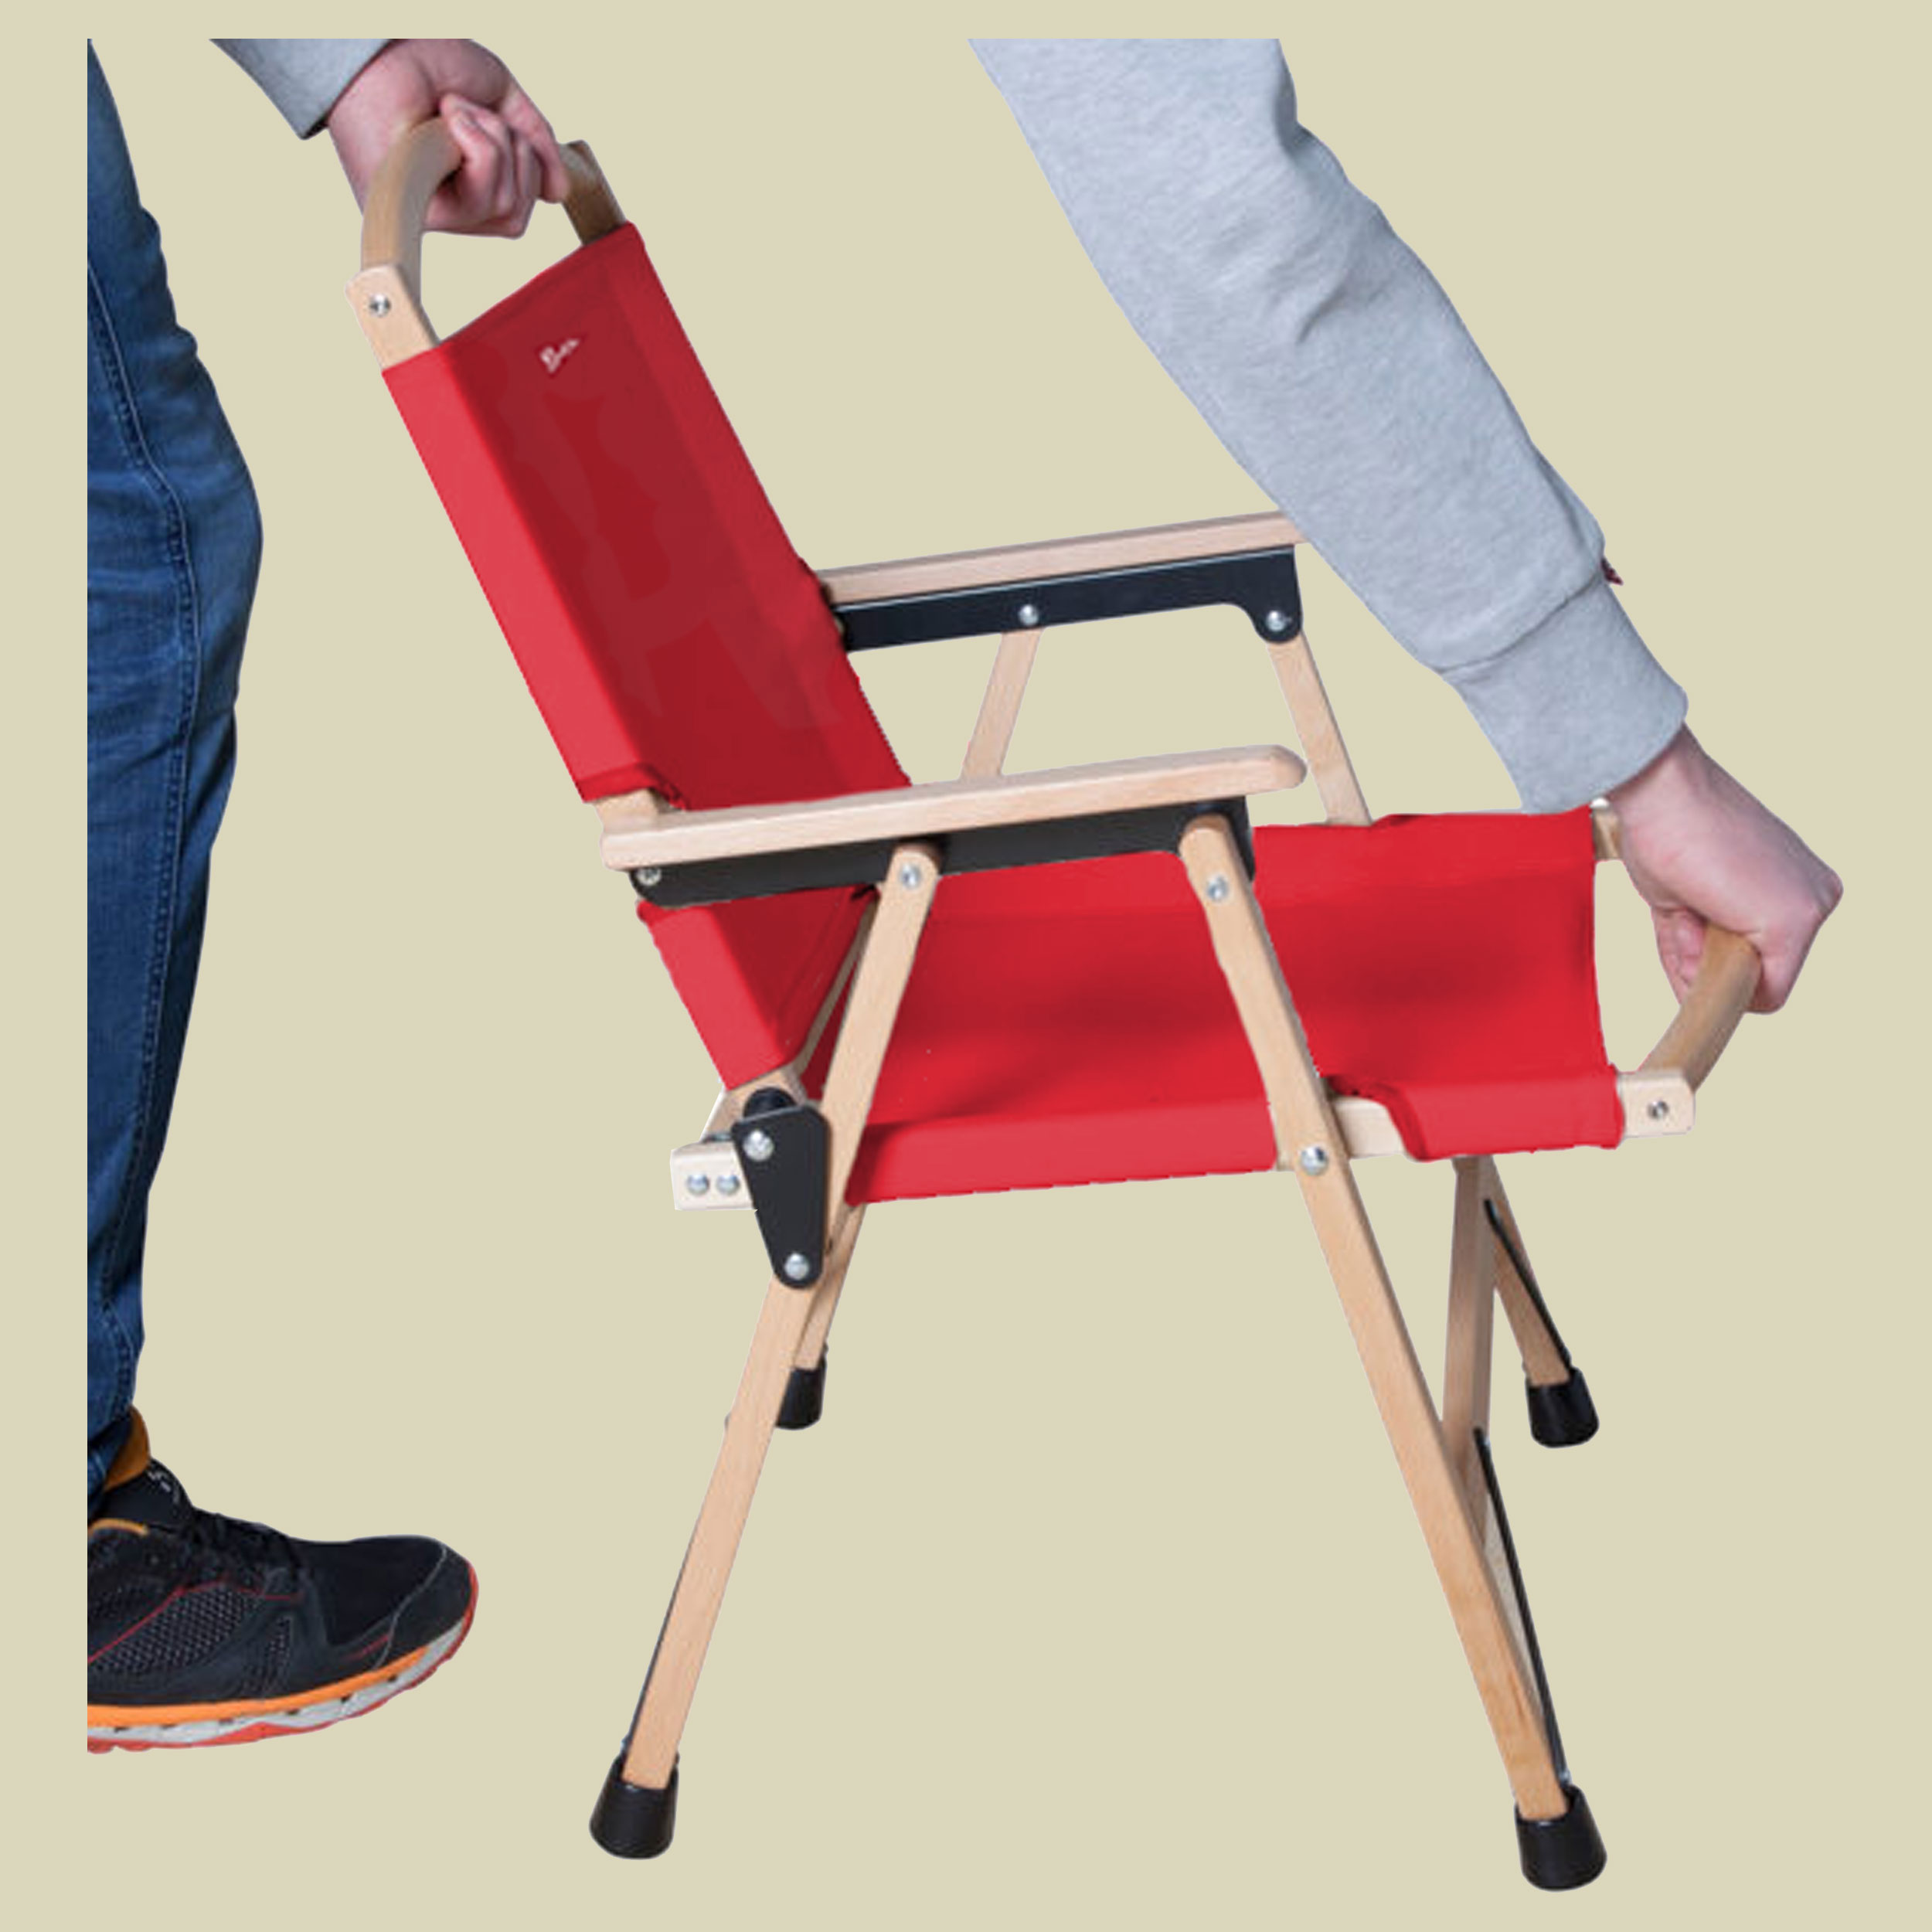 Chair Woodstar Größe one size Farbe flame red